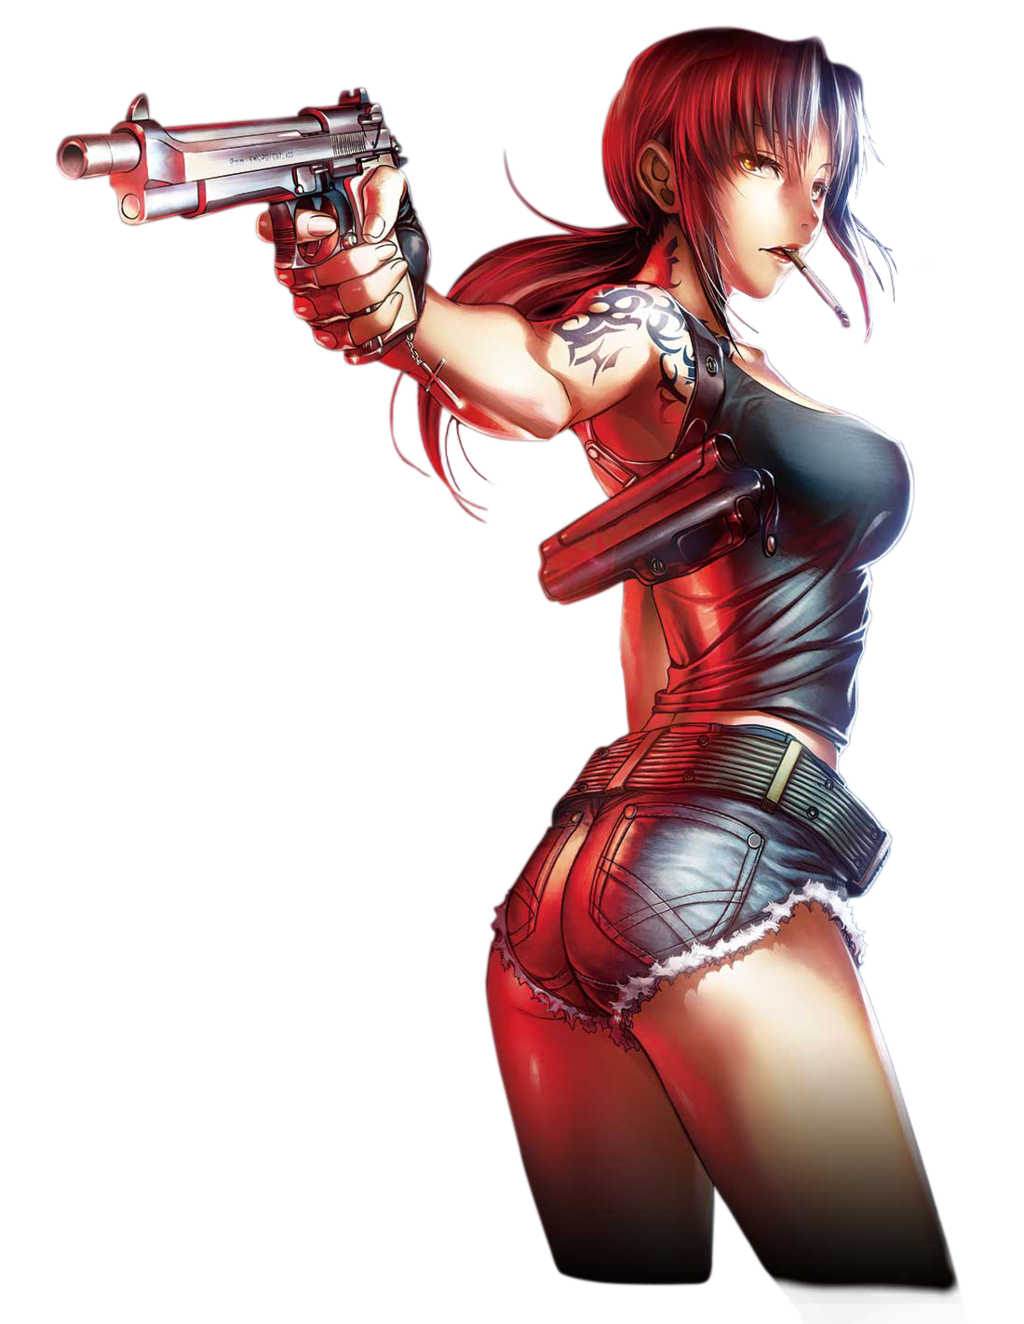 . PlusPng.com Revy from Black